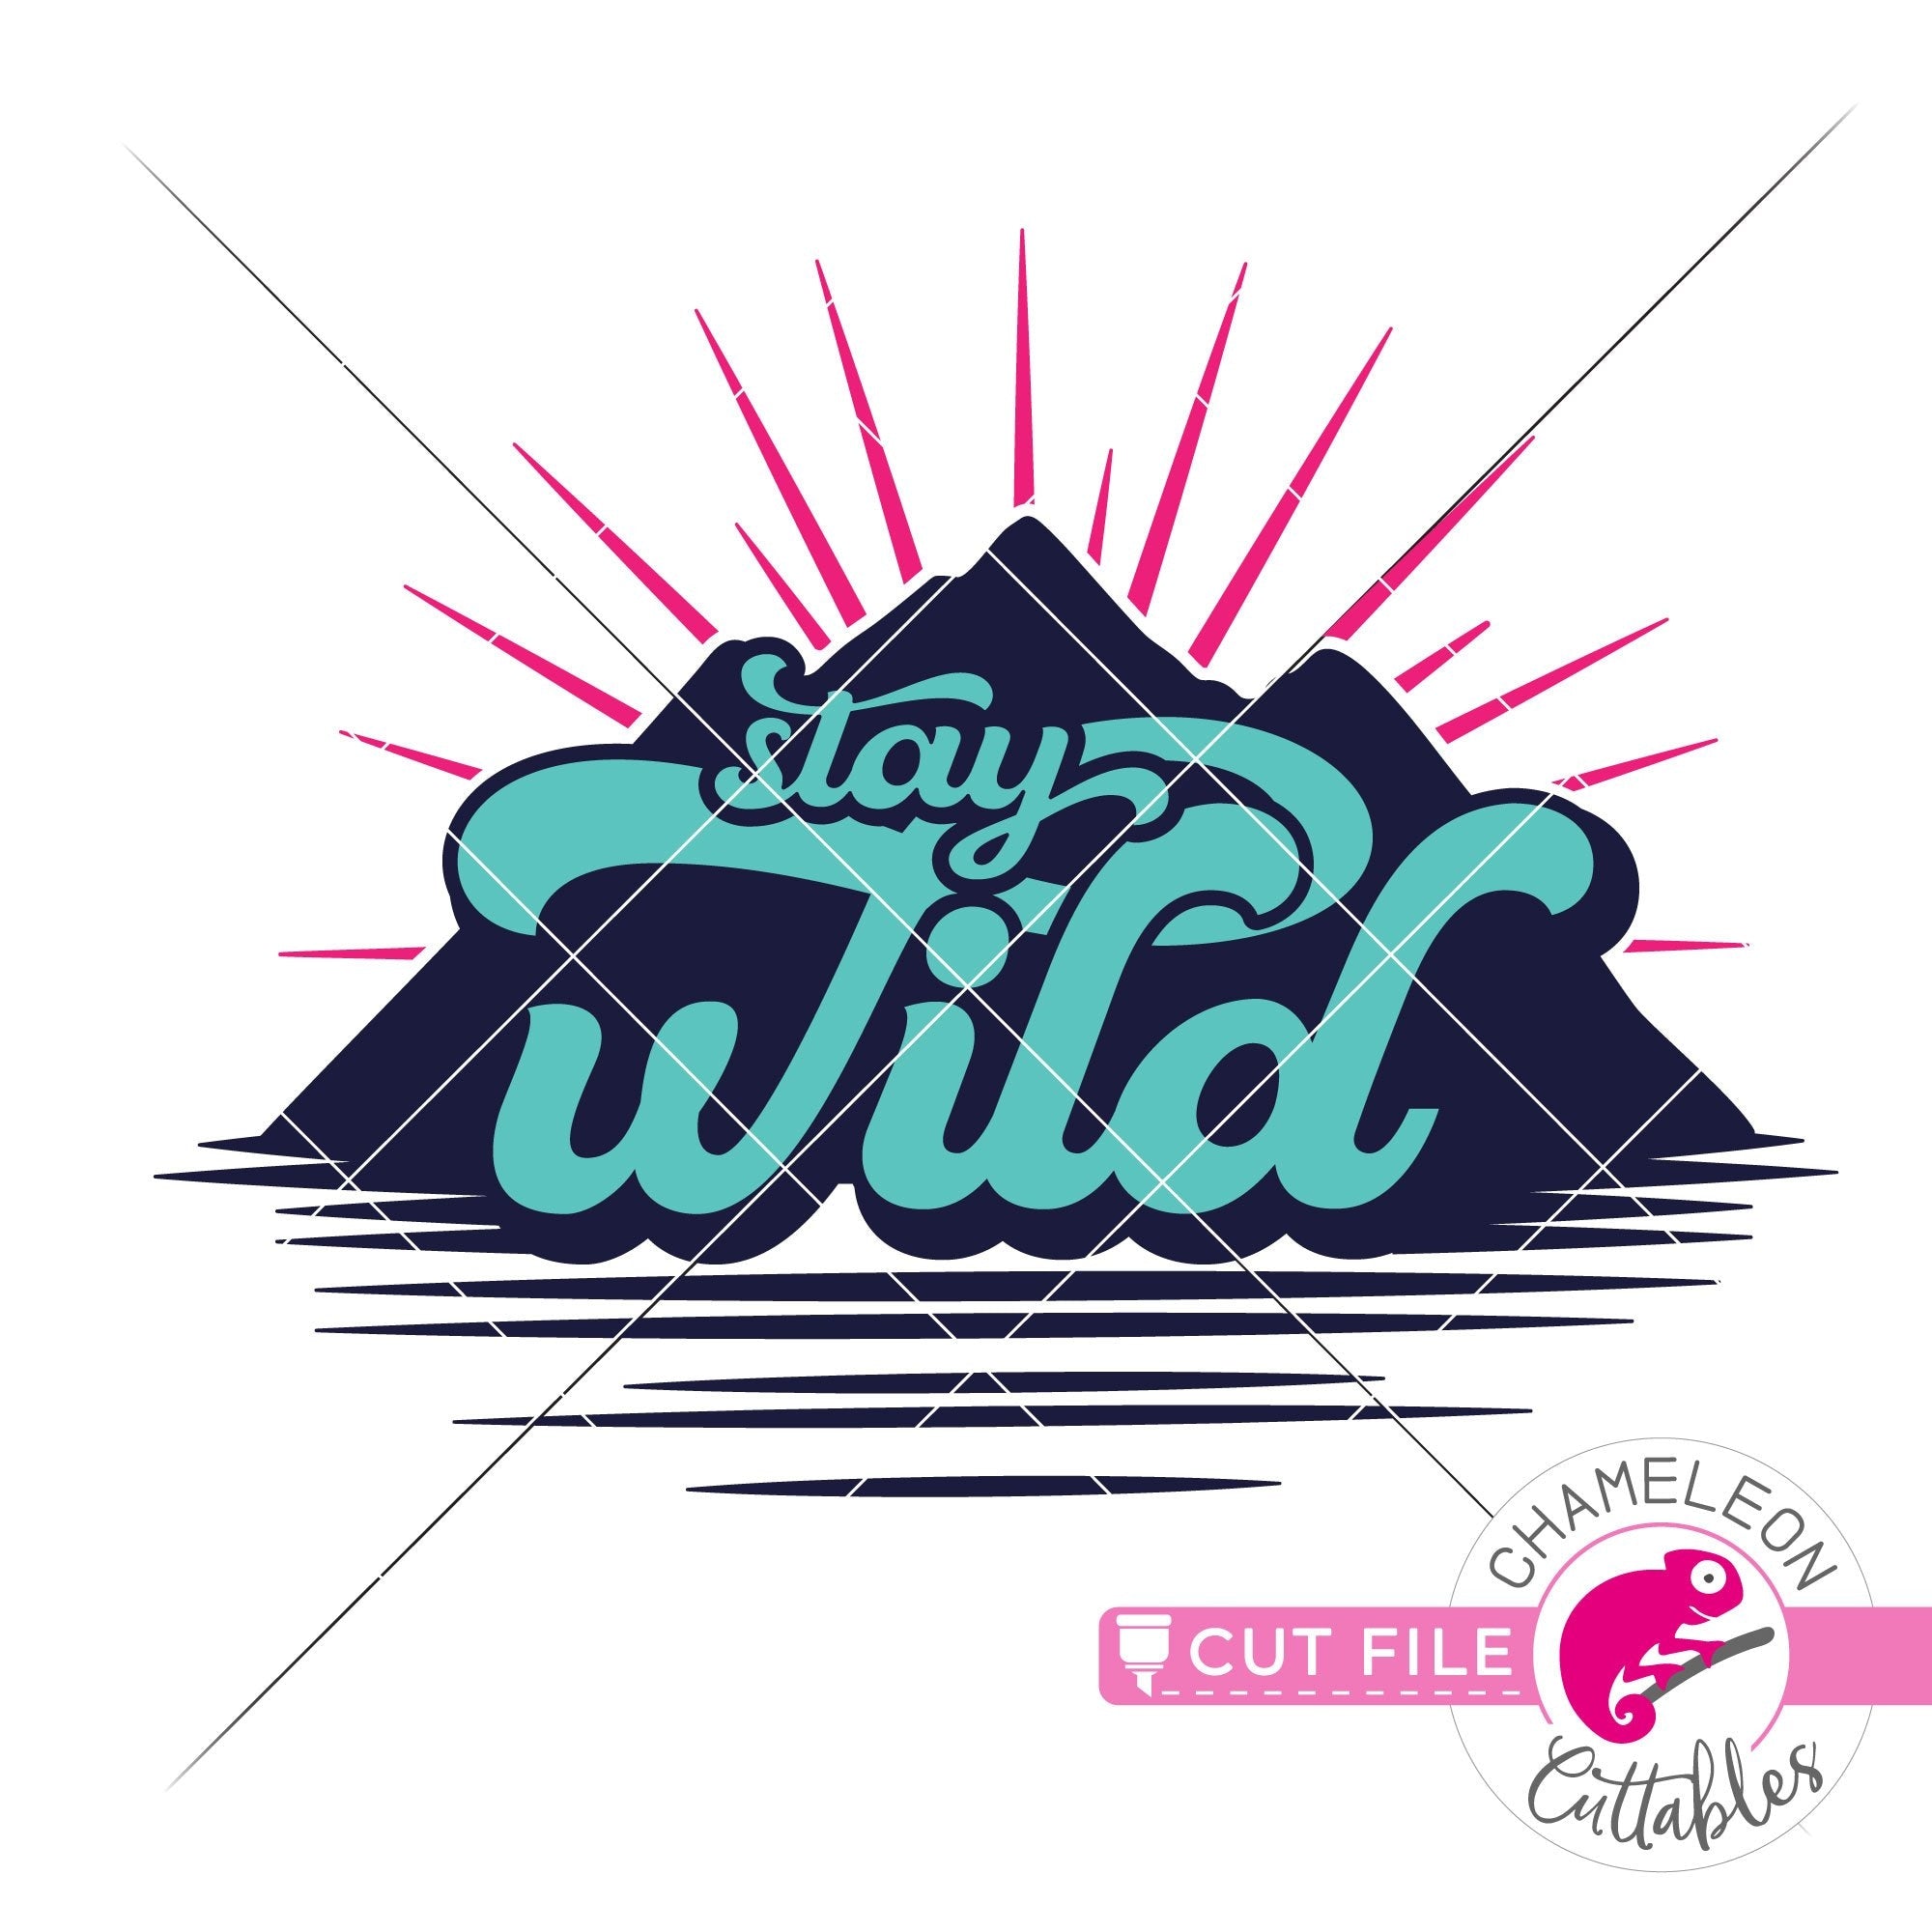 Download Stay Wild Mountain Outdoor Layered Svg Png Dxf Eps Jpeg Chameleon Cuttables Llc Chameleon Cuttables Llc